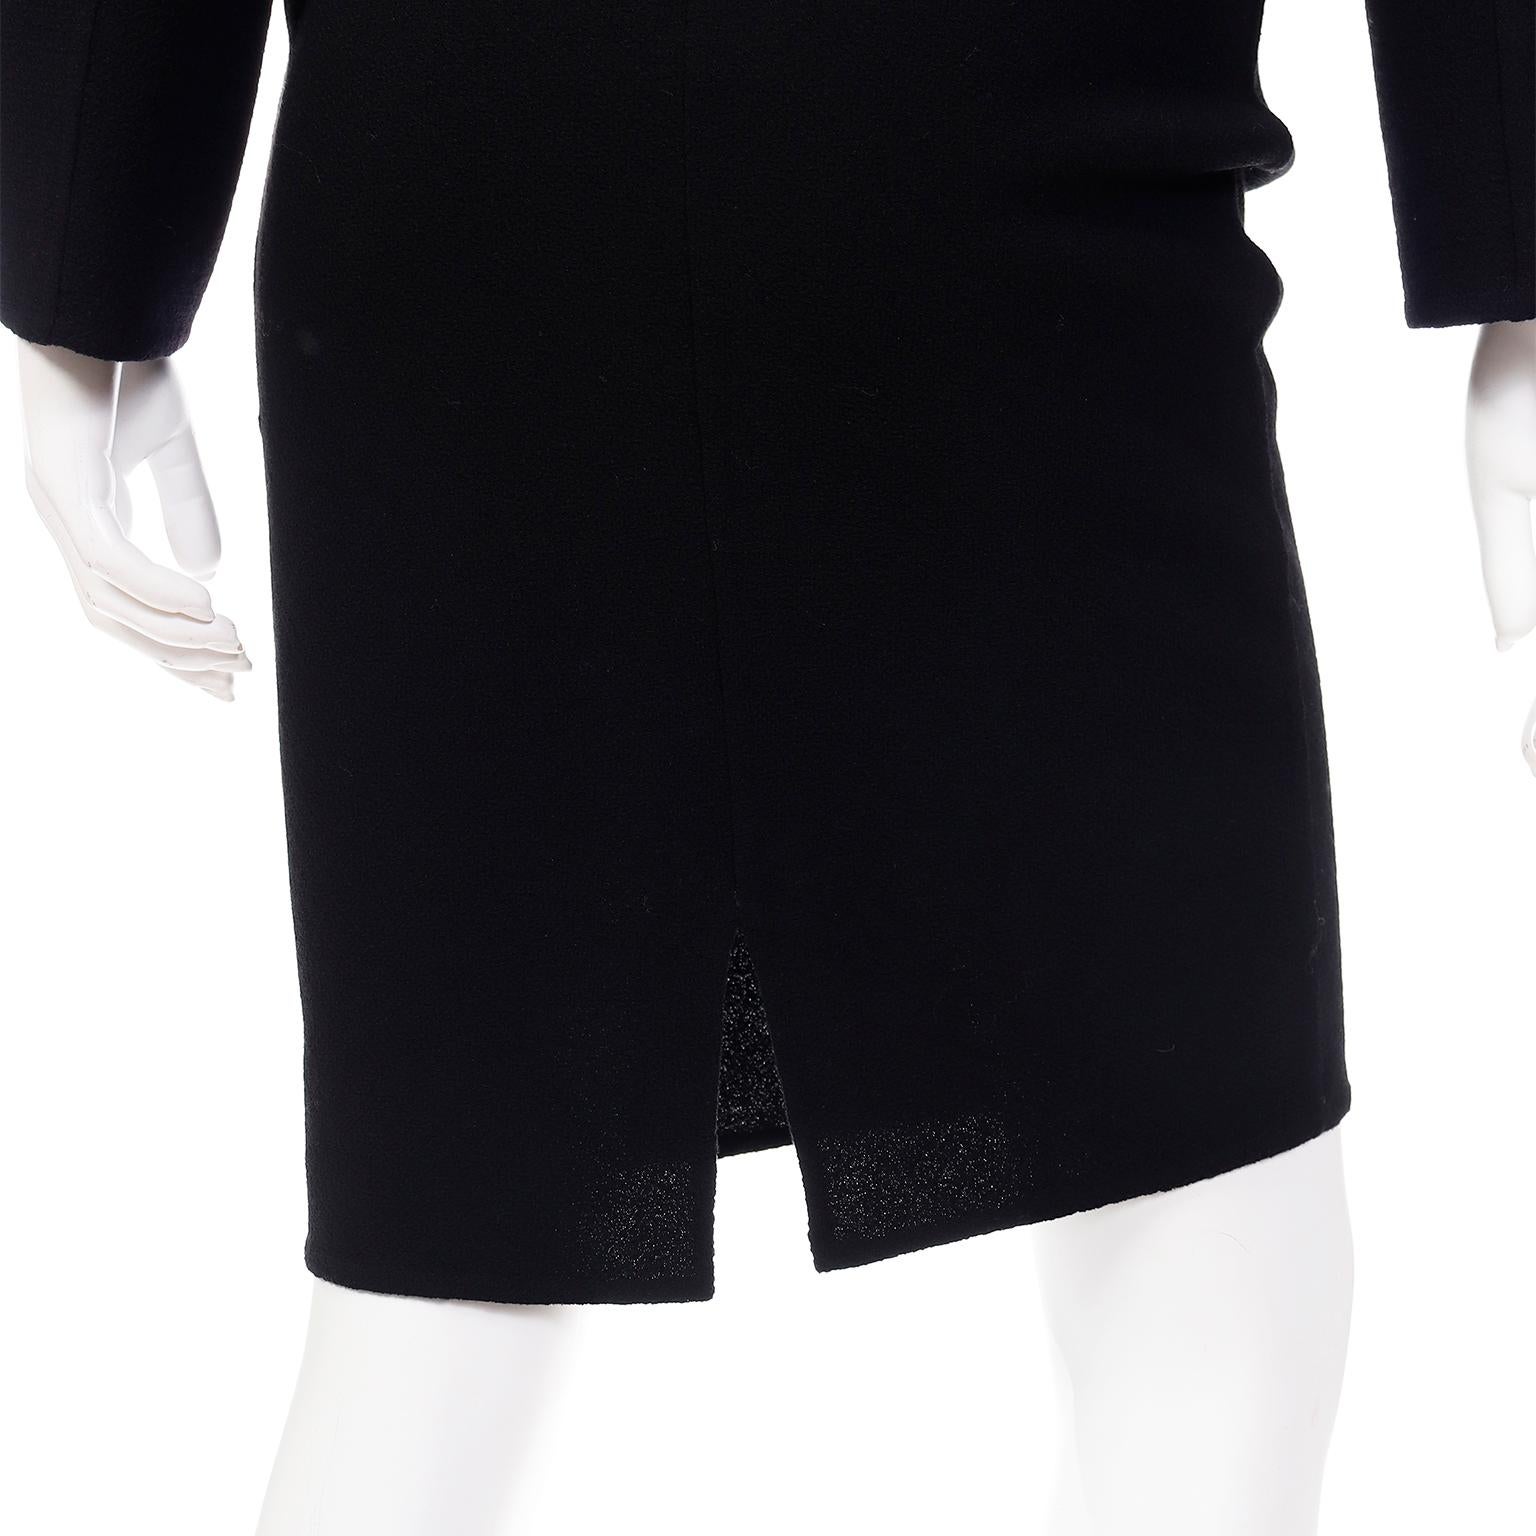 Valentino Black Skirt Suit With Unique Jacket With Bow & Buckle For Sale 5